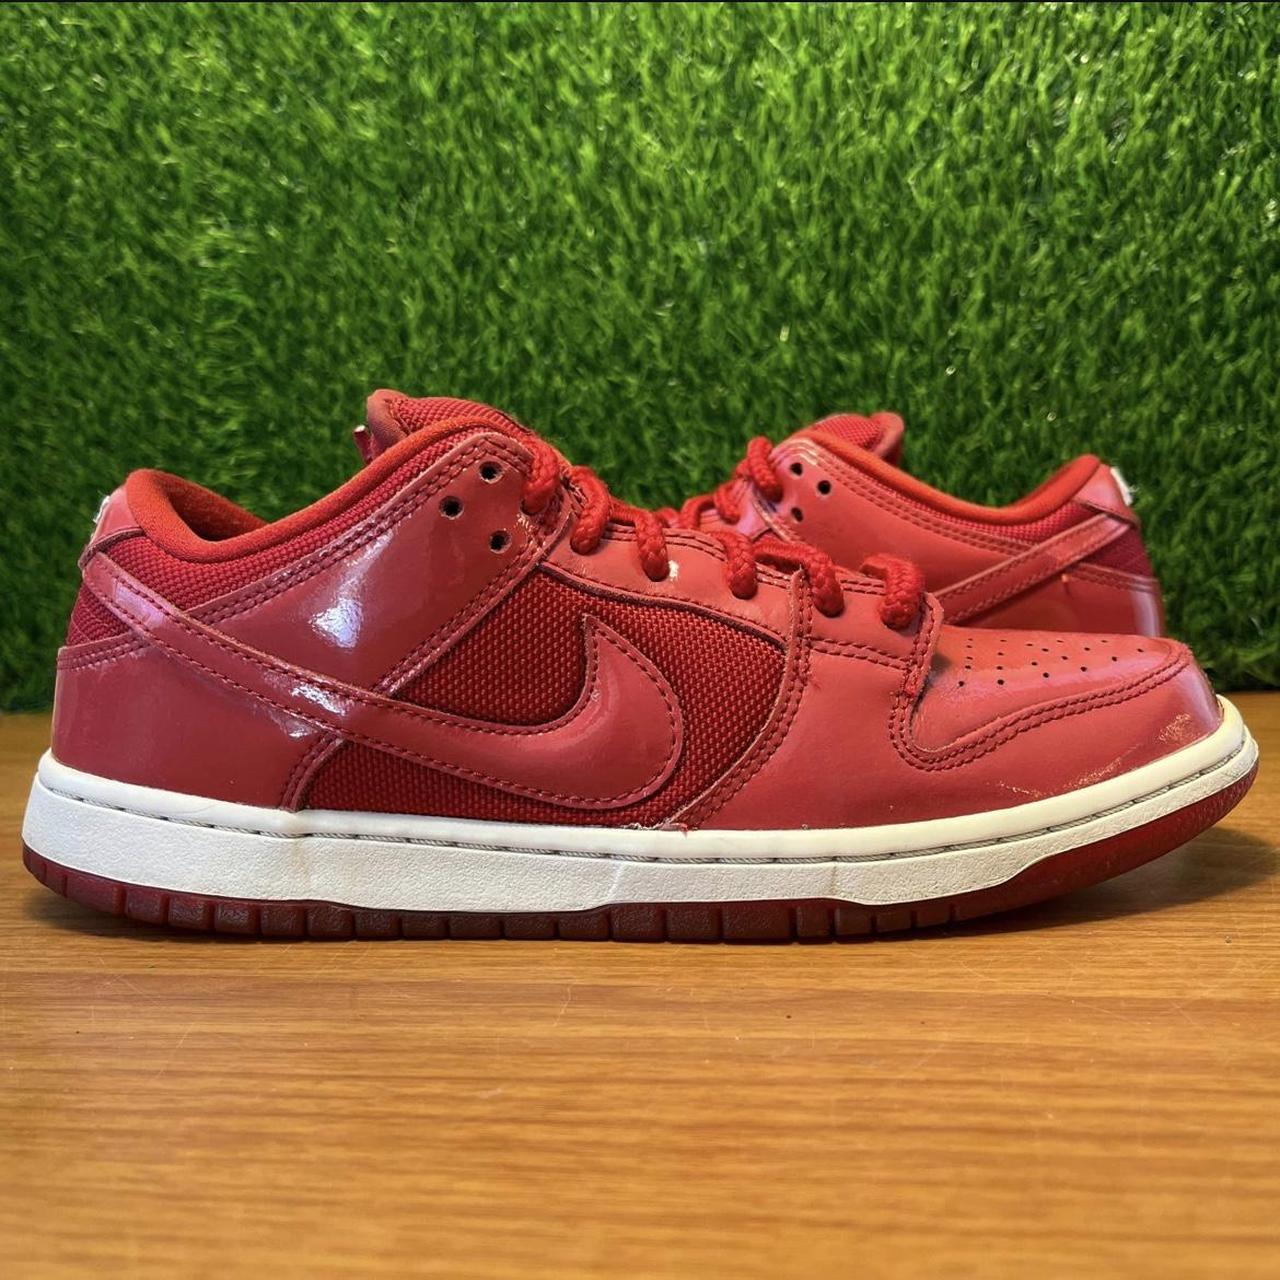 Nike SB Dunk Low Red Patent Leather 2015 Size 8...